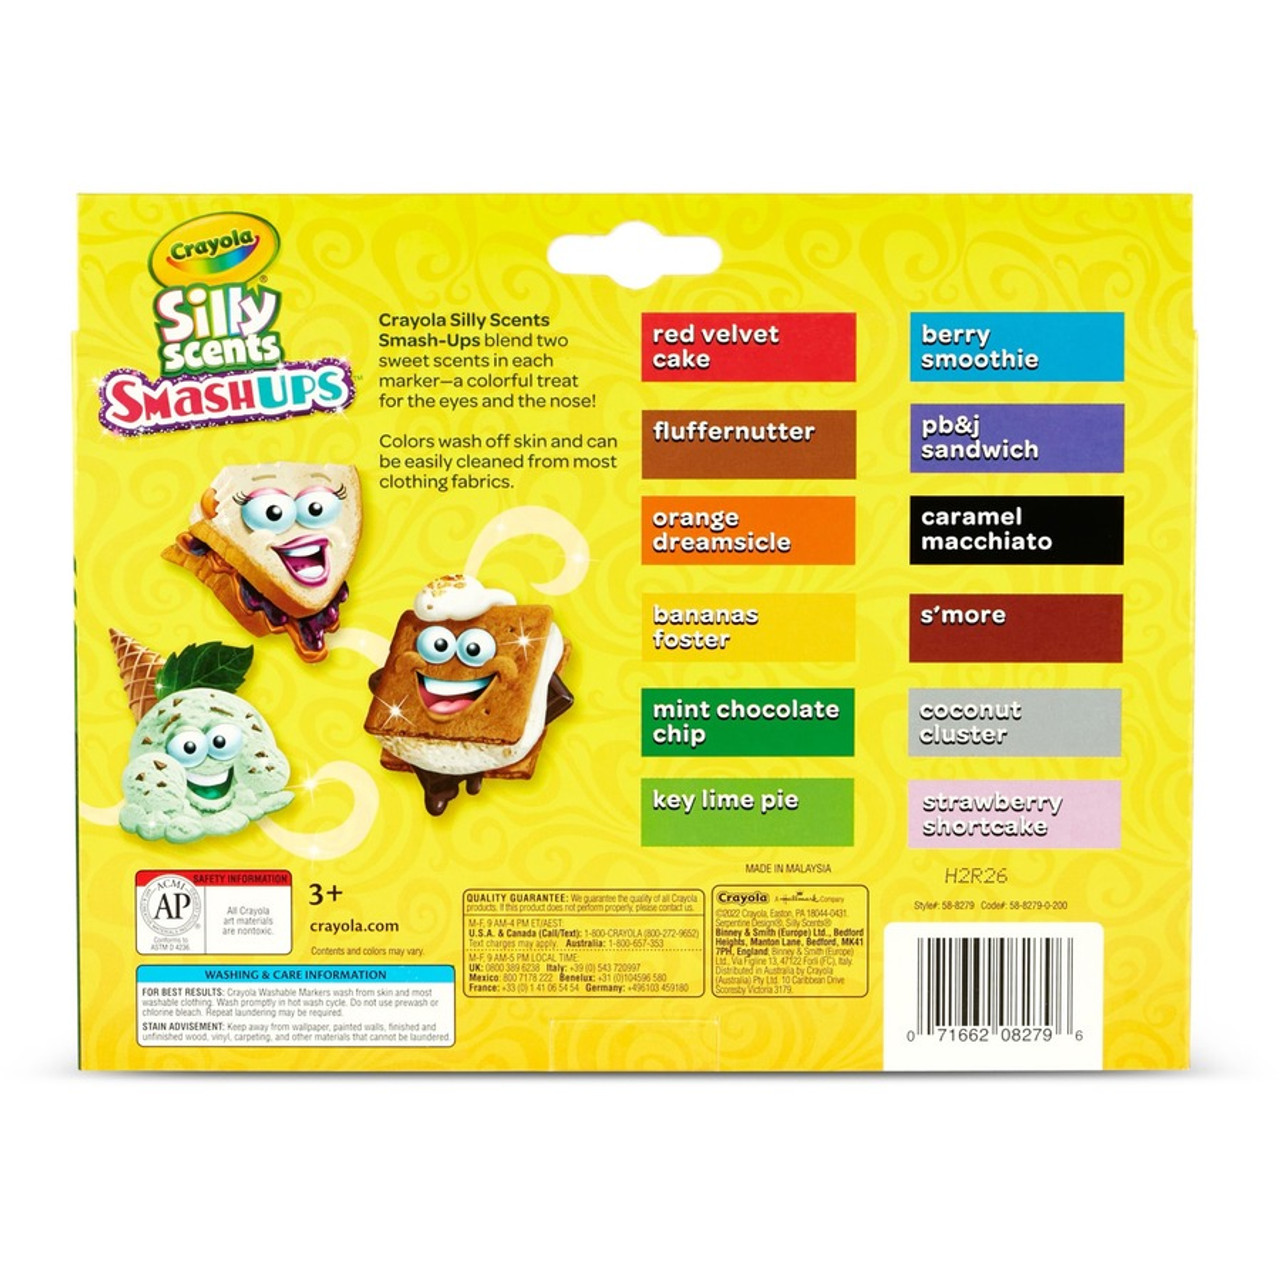 Washable Markers (CRAYOLA SILLY SCENTS) – C&I Office Supplies S.A.